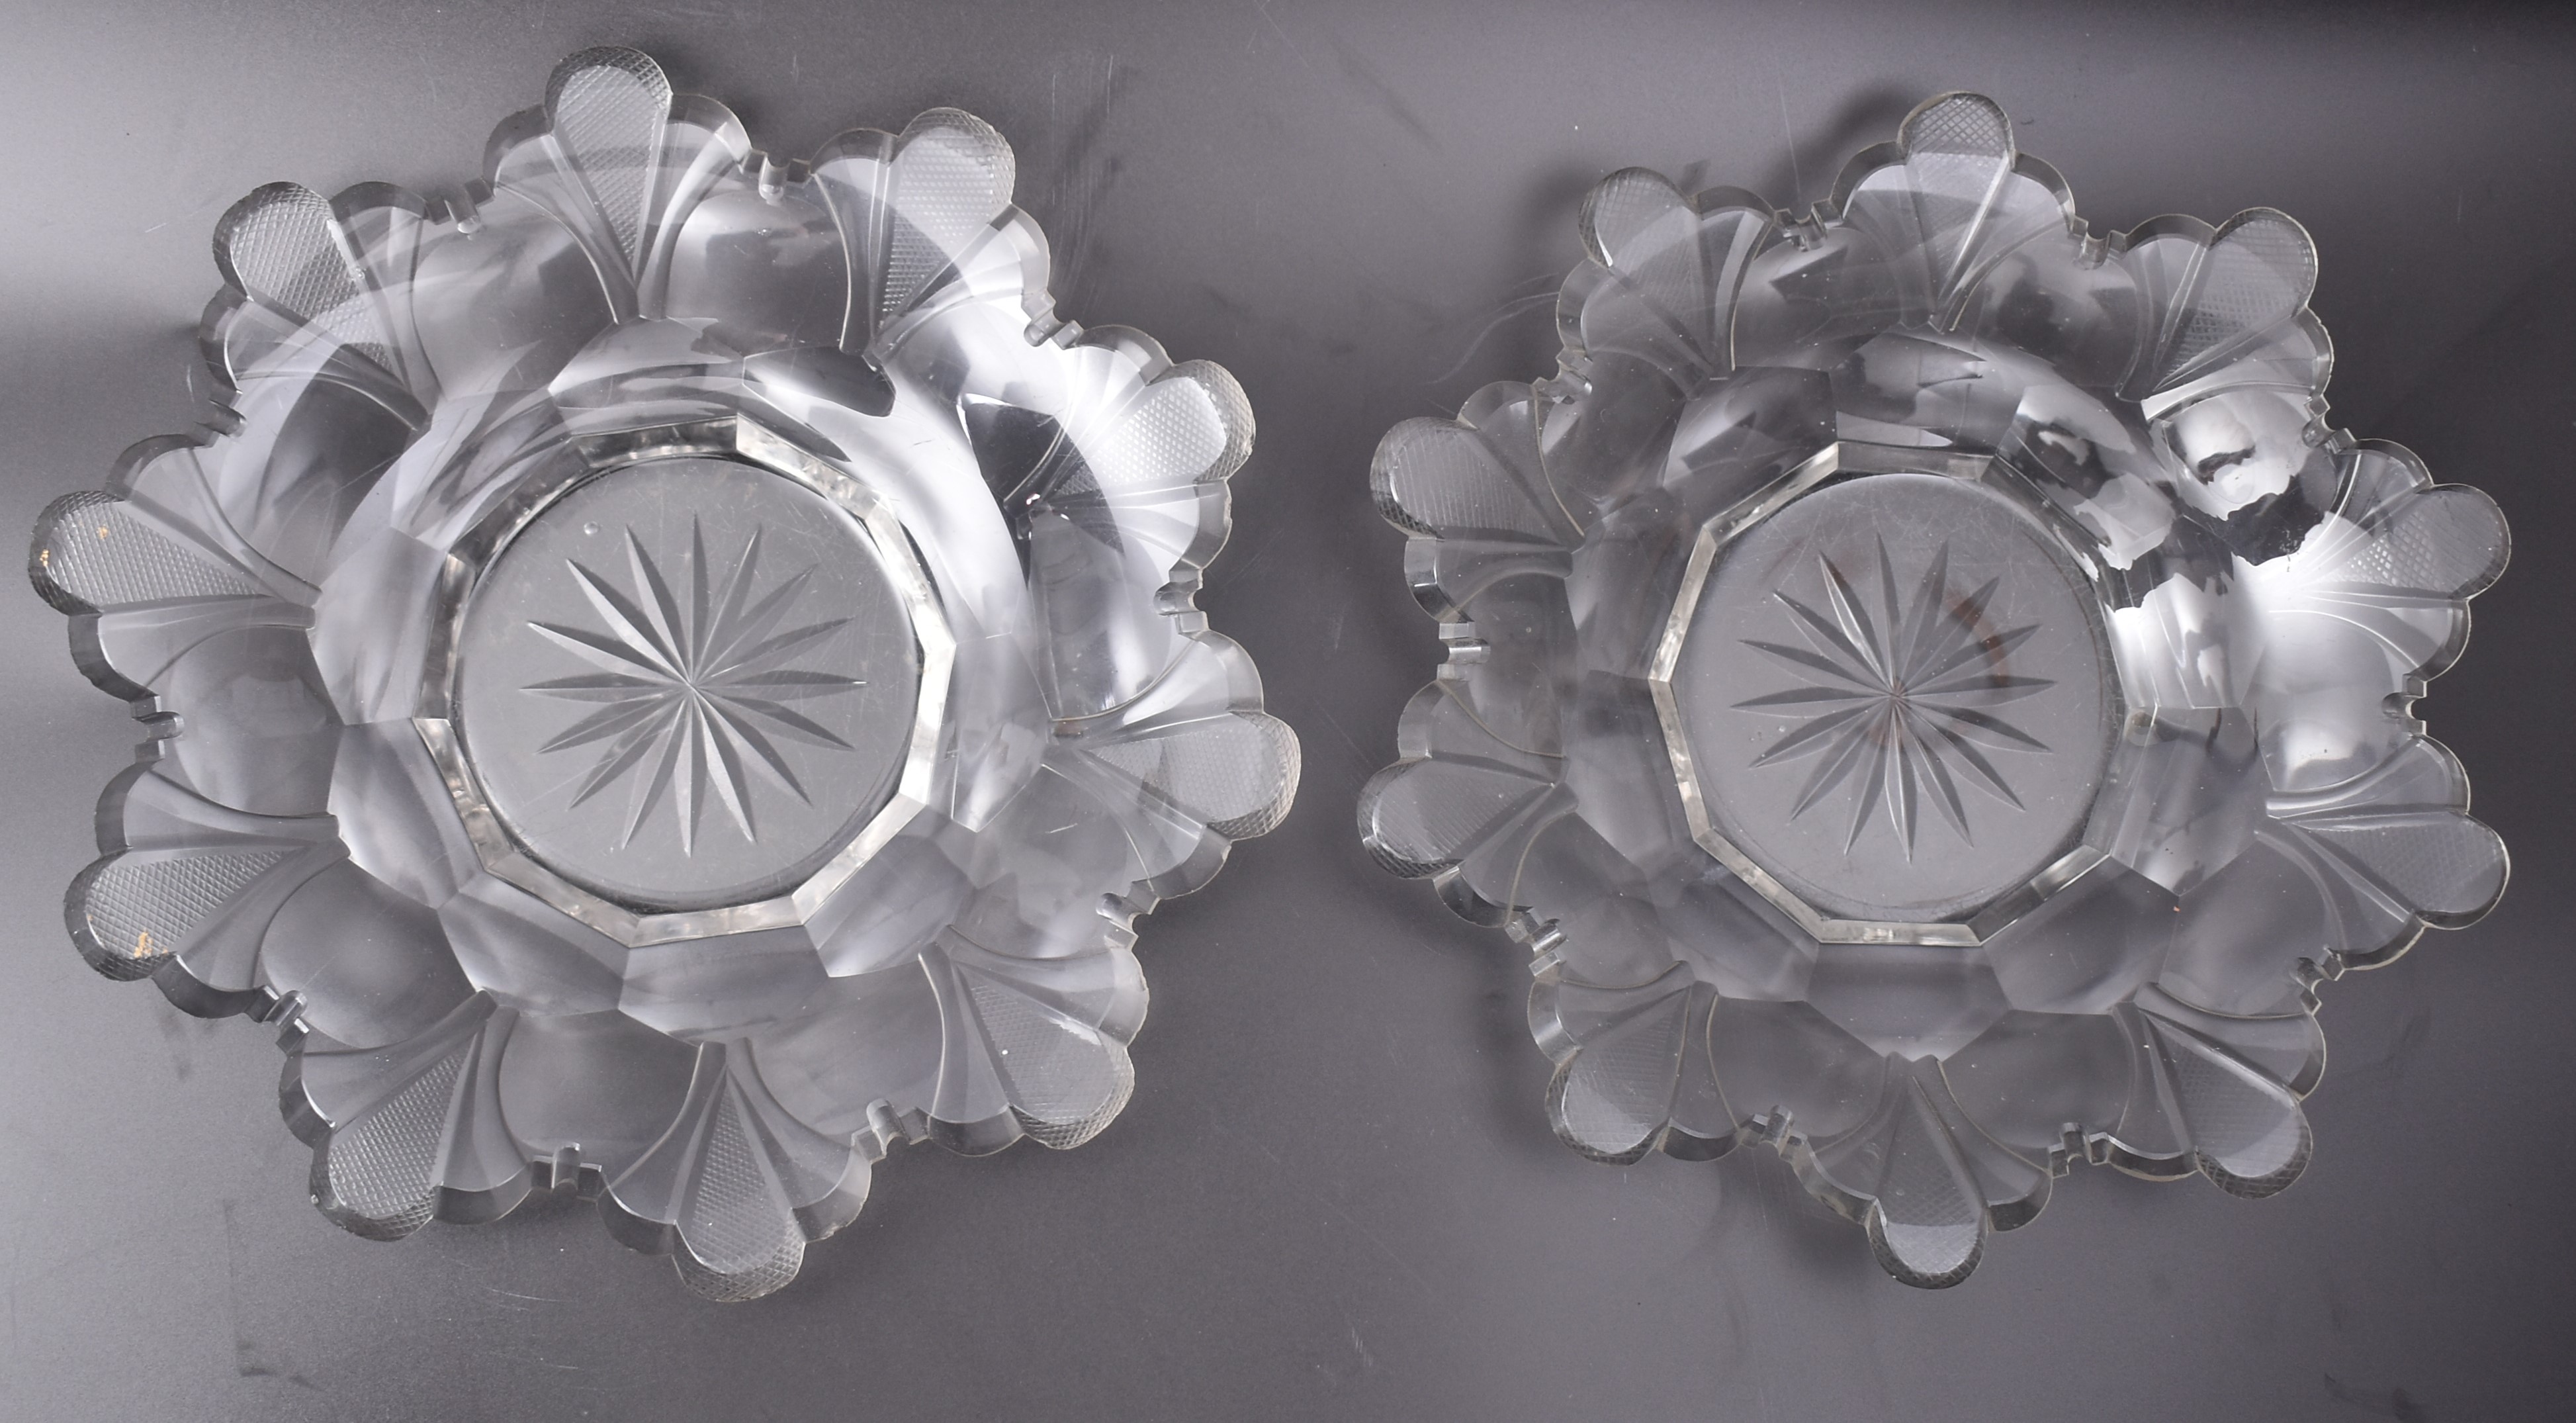 PAIR OF EARLY 19TH CENTURY IRISH CUT GLASS DISHES